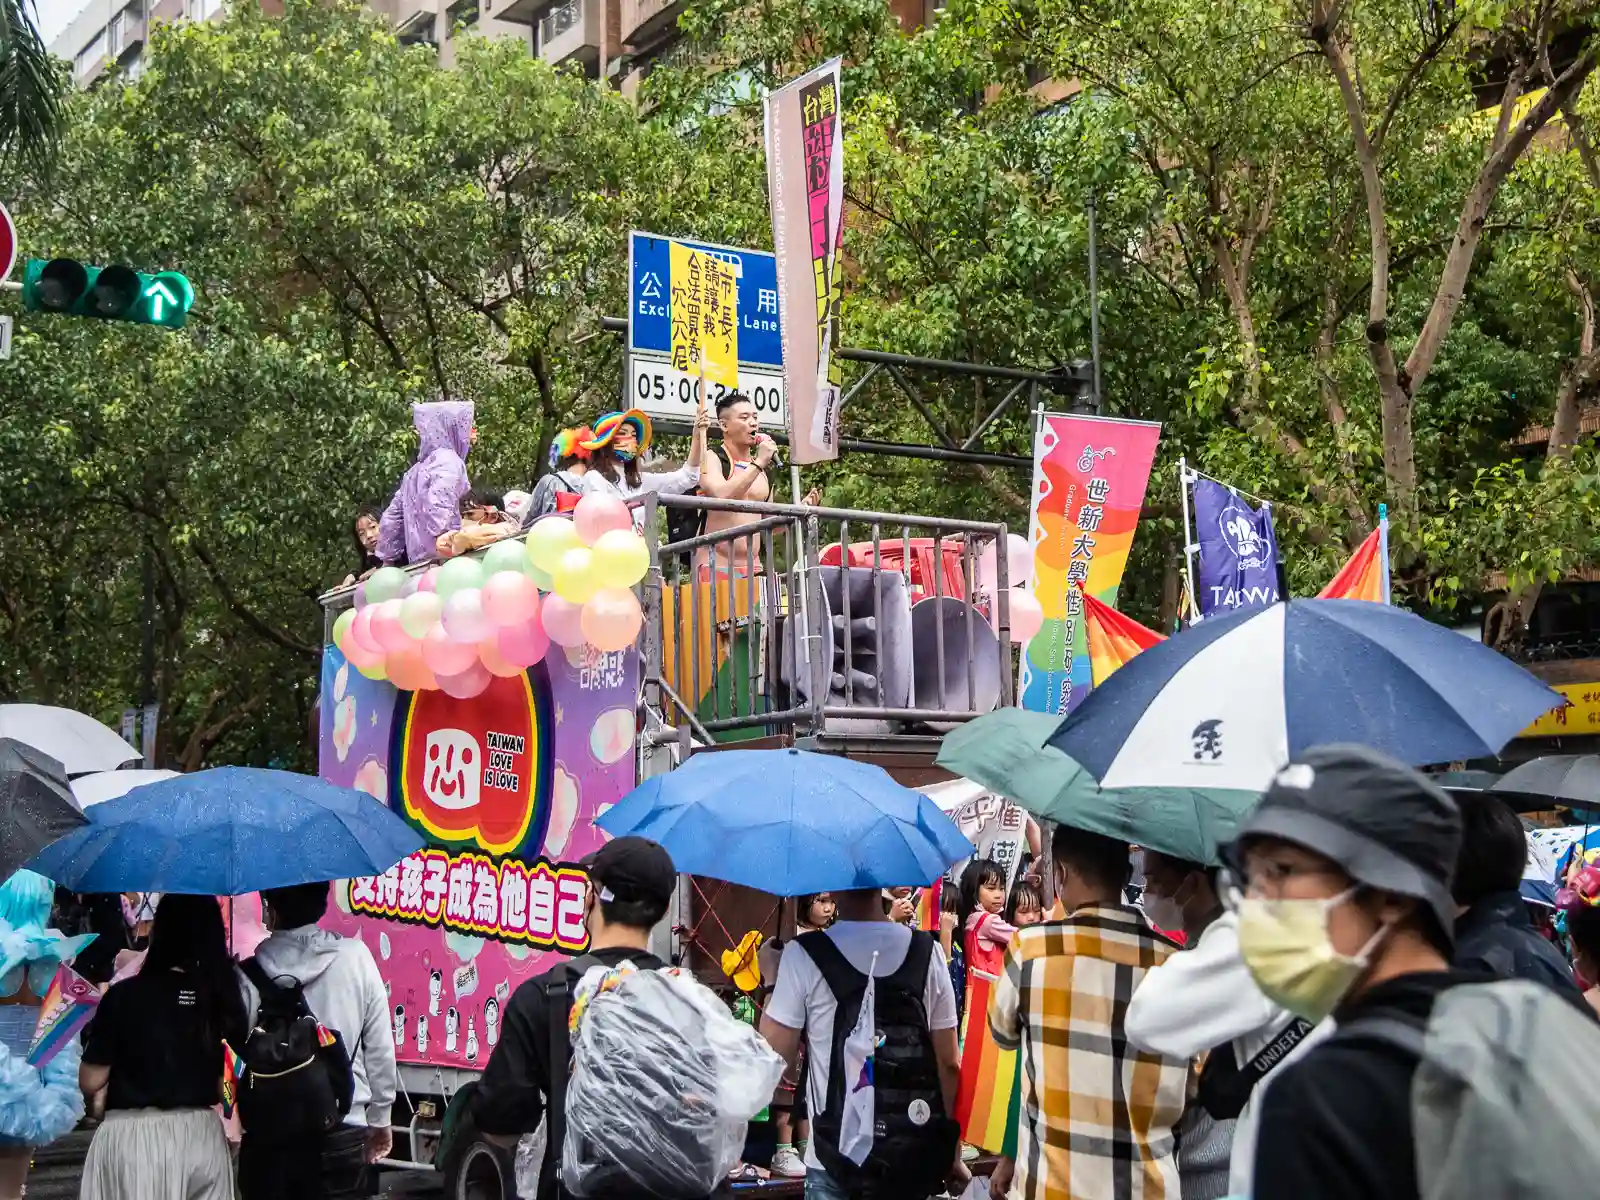 The banner on the side of a parade float reads "Taiwan Love is Love".